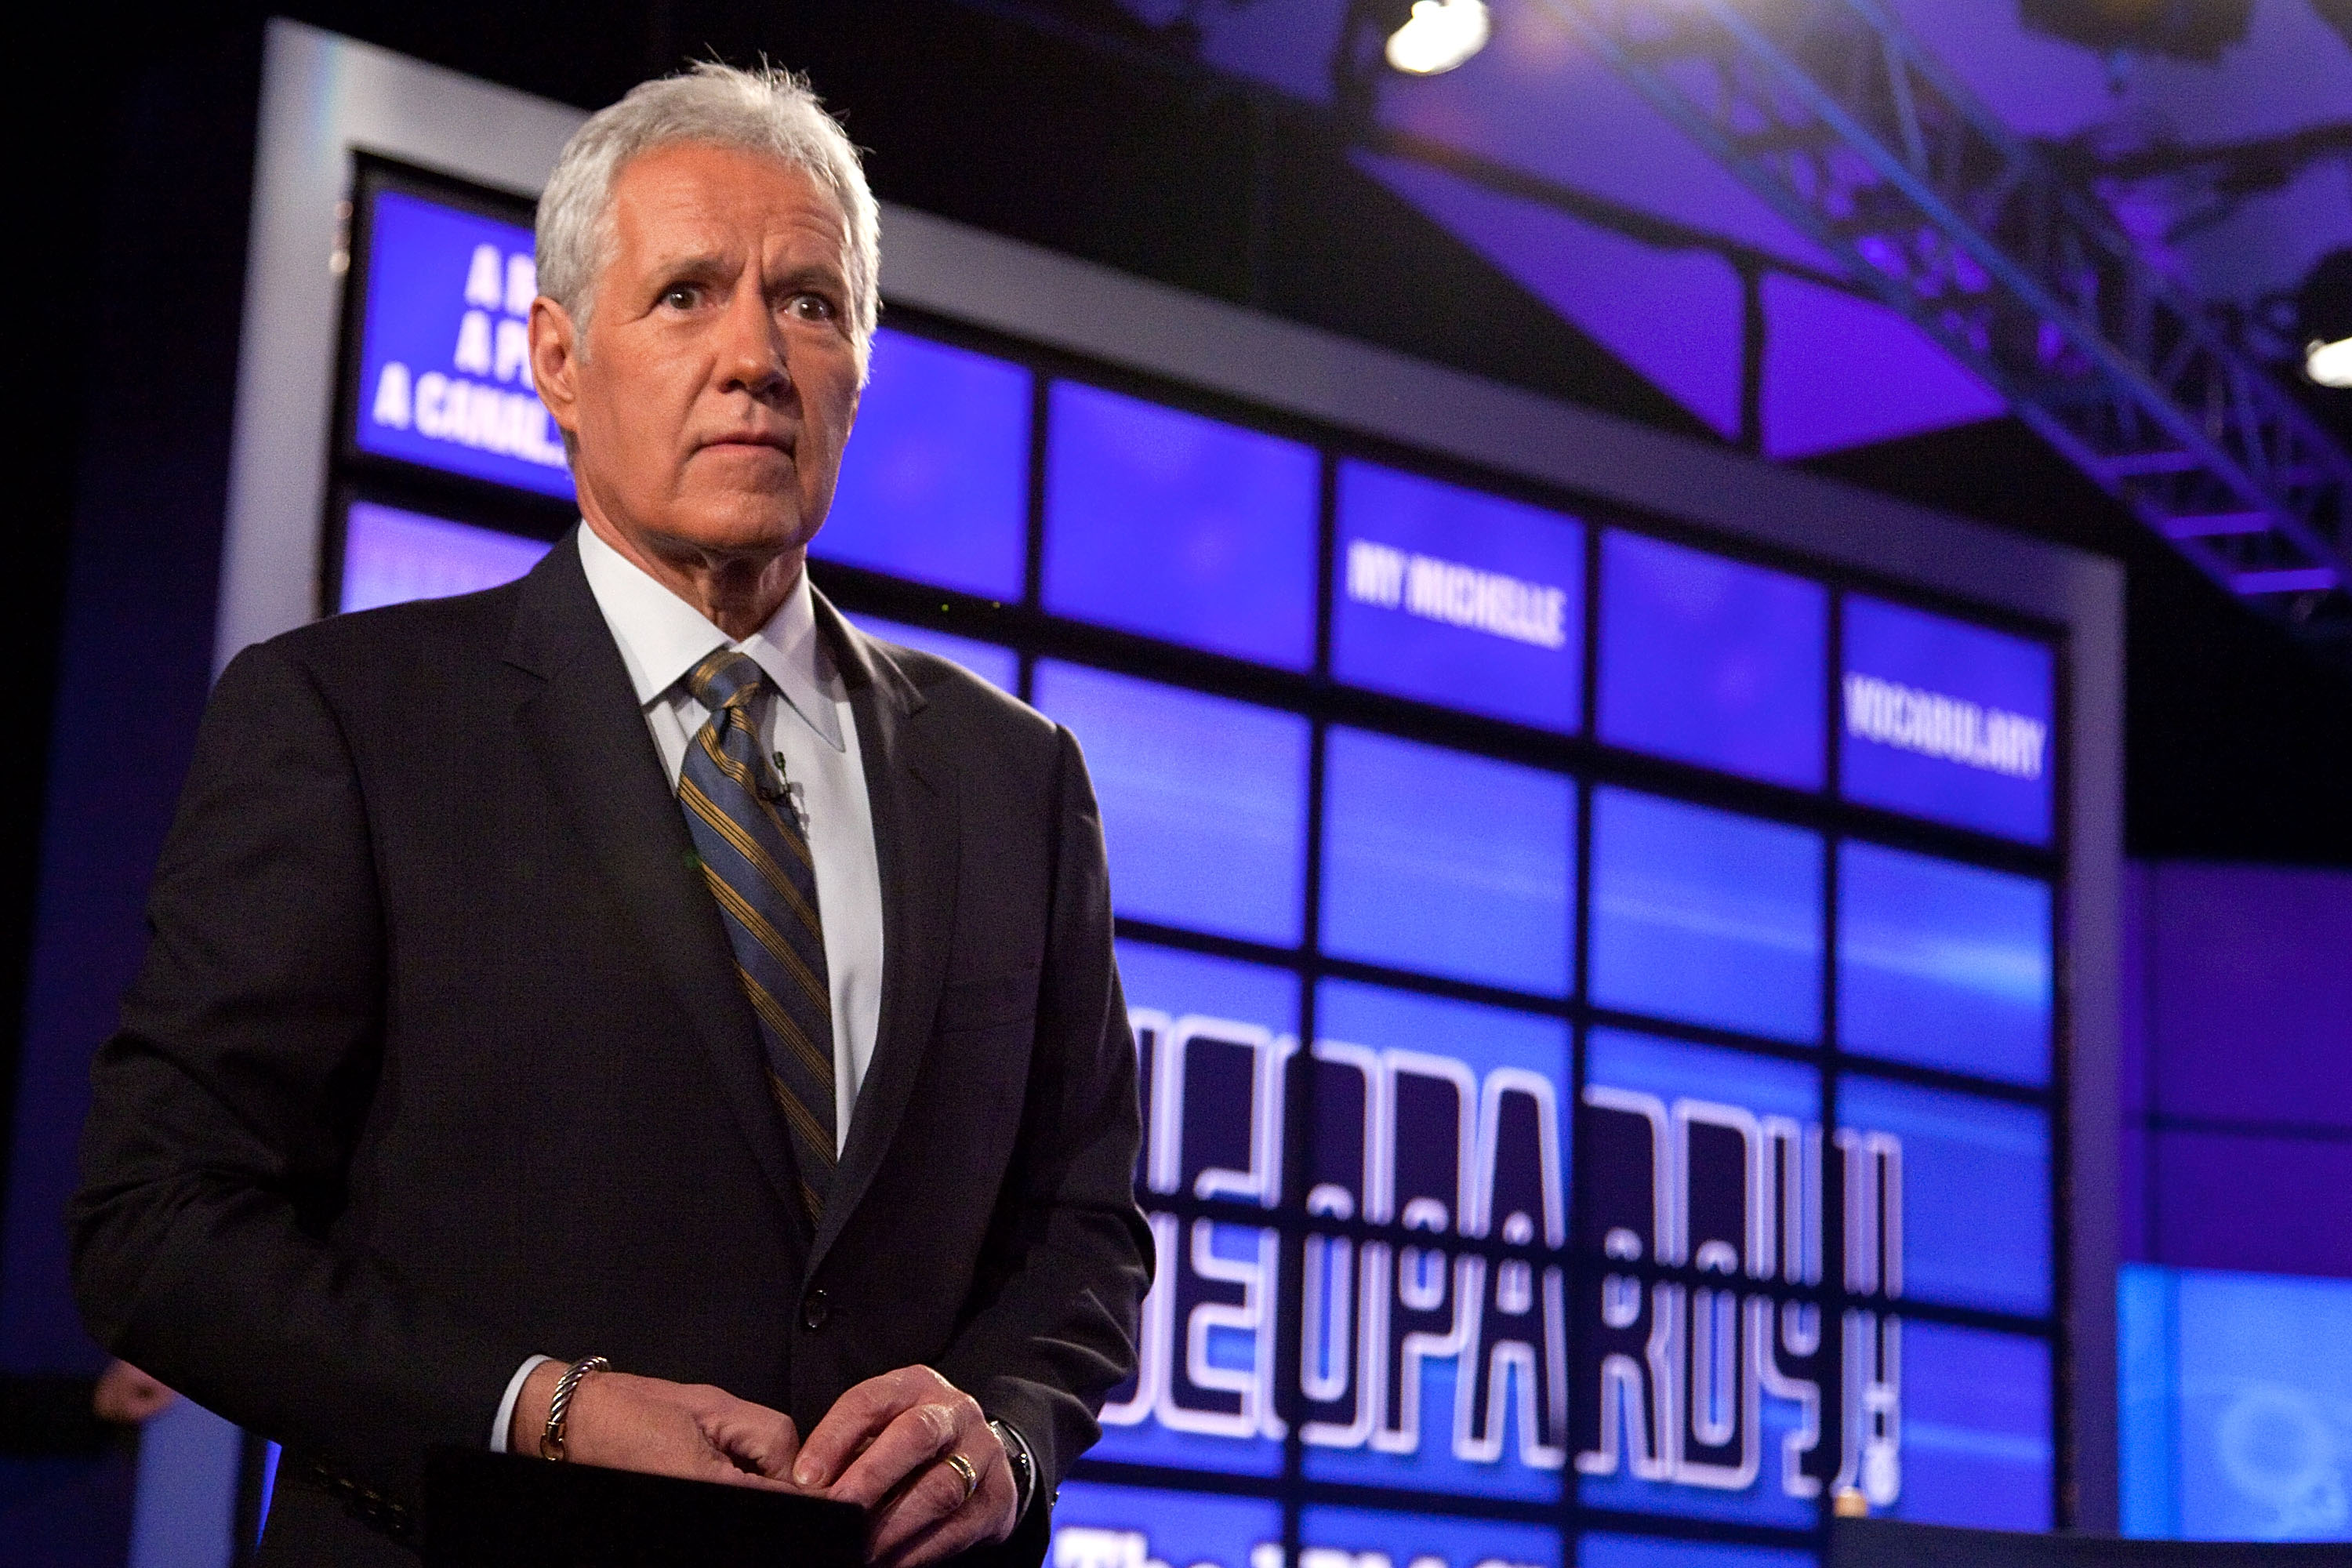 The late 'Jeopardy!' host Alex Trebek speaks while standing in front of the game show board, 2011